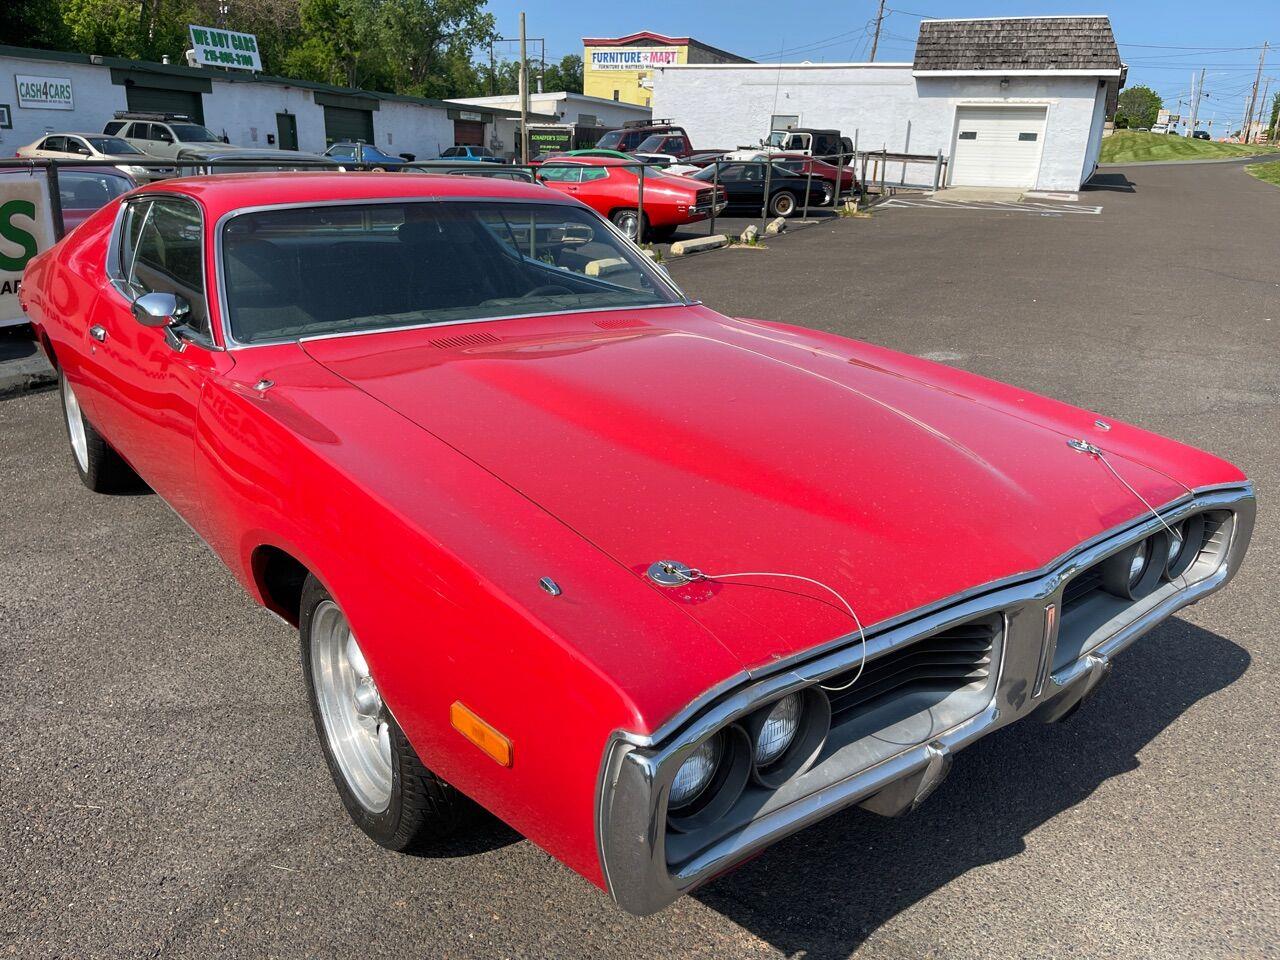 For Sale: 1972 Dodge Charger in Penndel, Pennsylvania for sale in Langhorne, PA